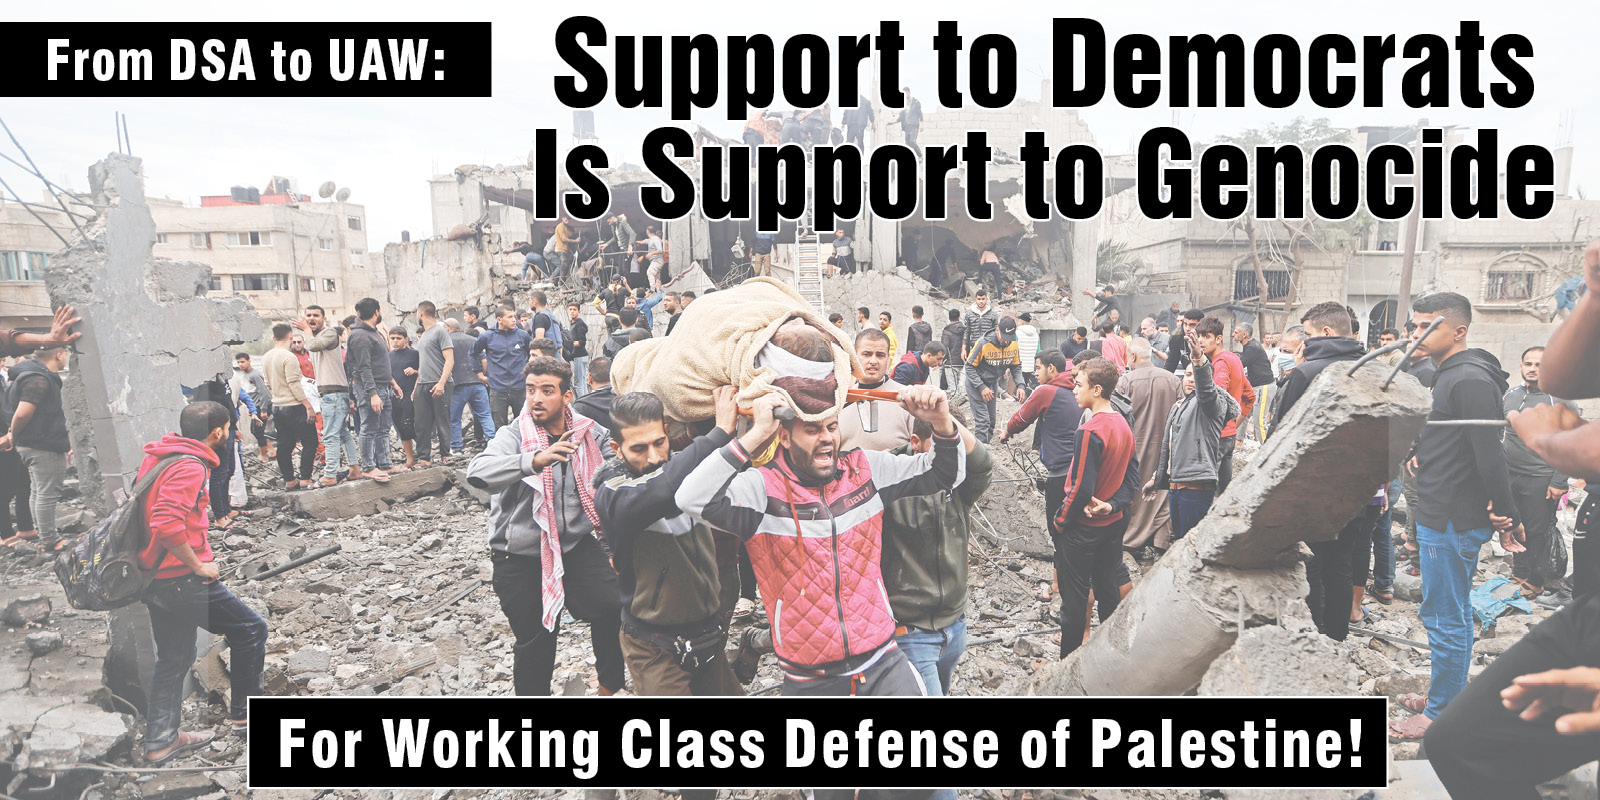 From DSA to UAW: Support to Democrats Is Support to Genocide